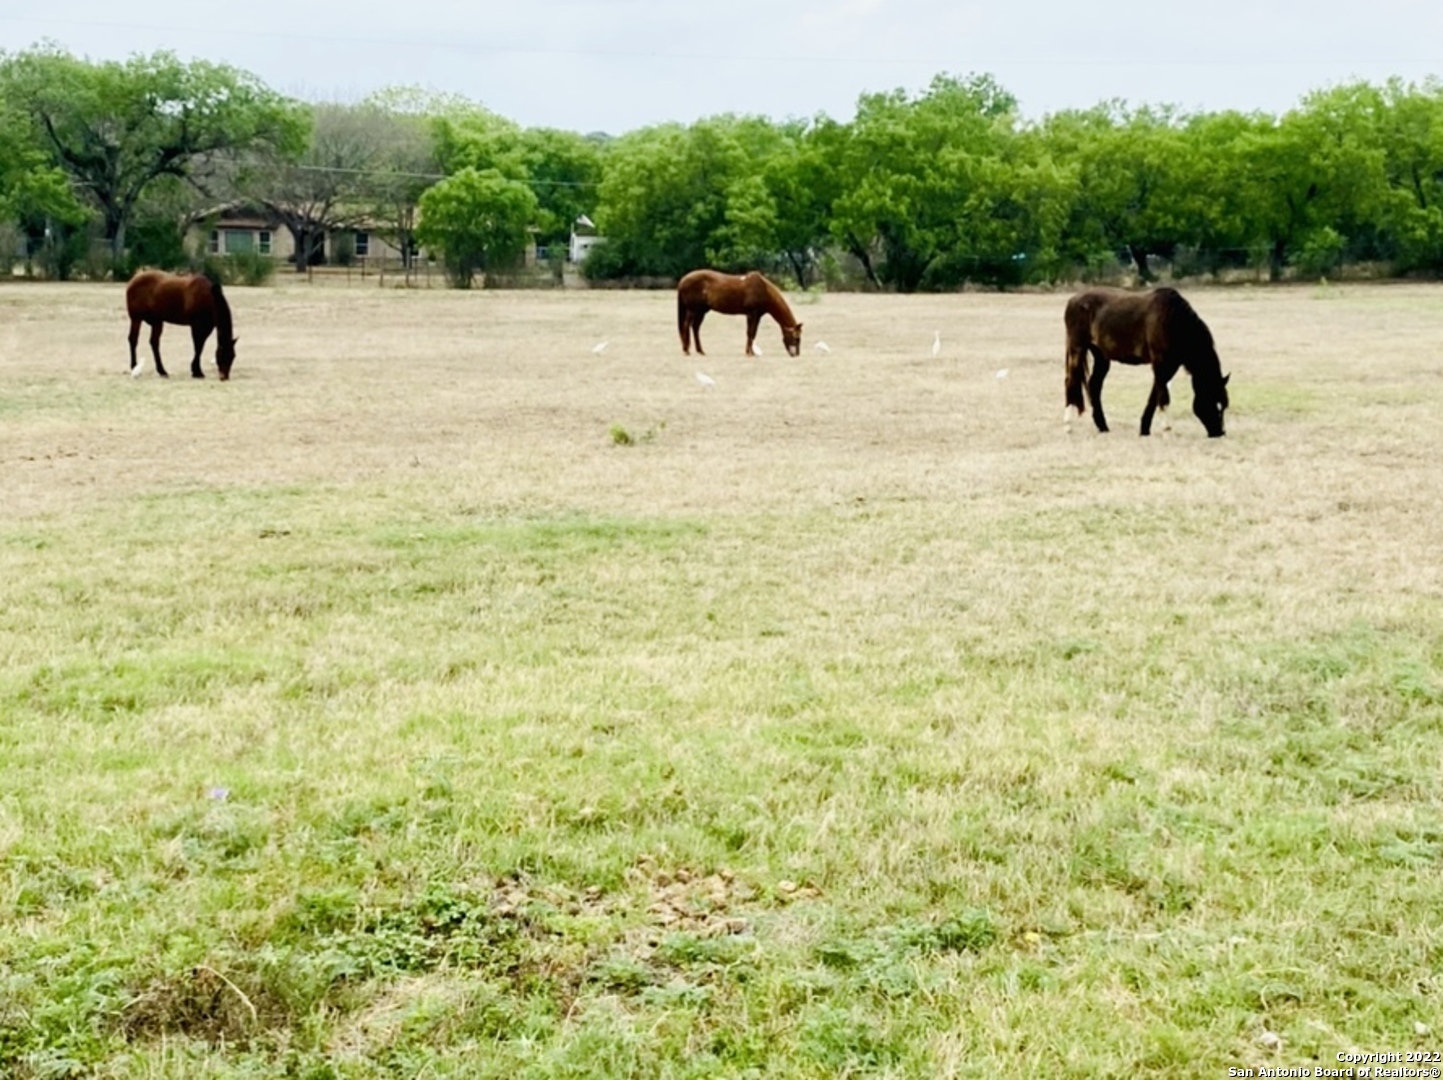 This is a rare opportunity to own a beautiful 5 +/- Acre track near China Grove, just minutes from downtown San Antonio.     Build Your Dream Home! Farm Animals are welcomed!  It's a must see.